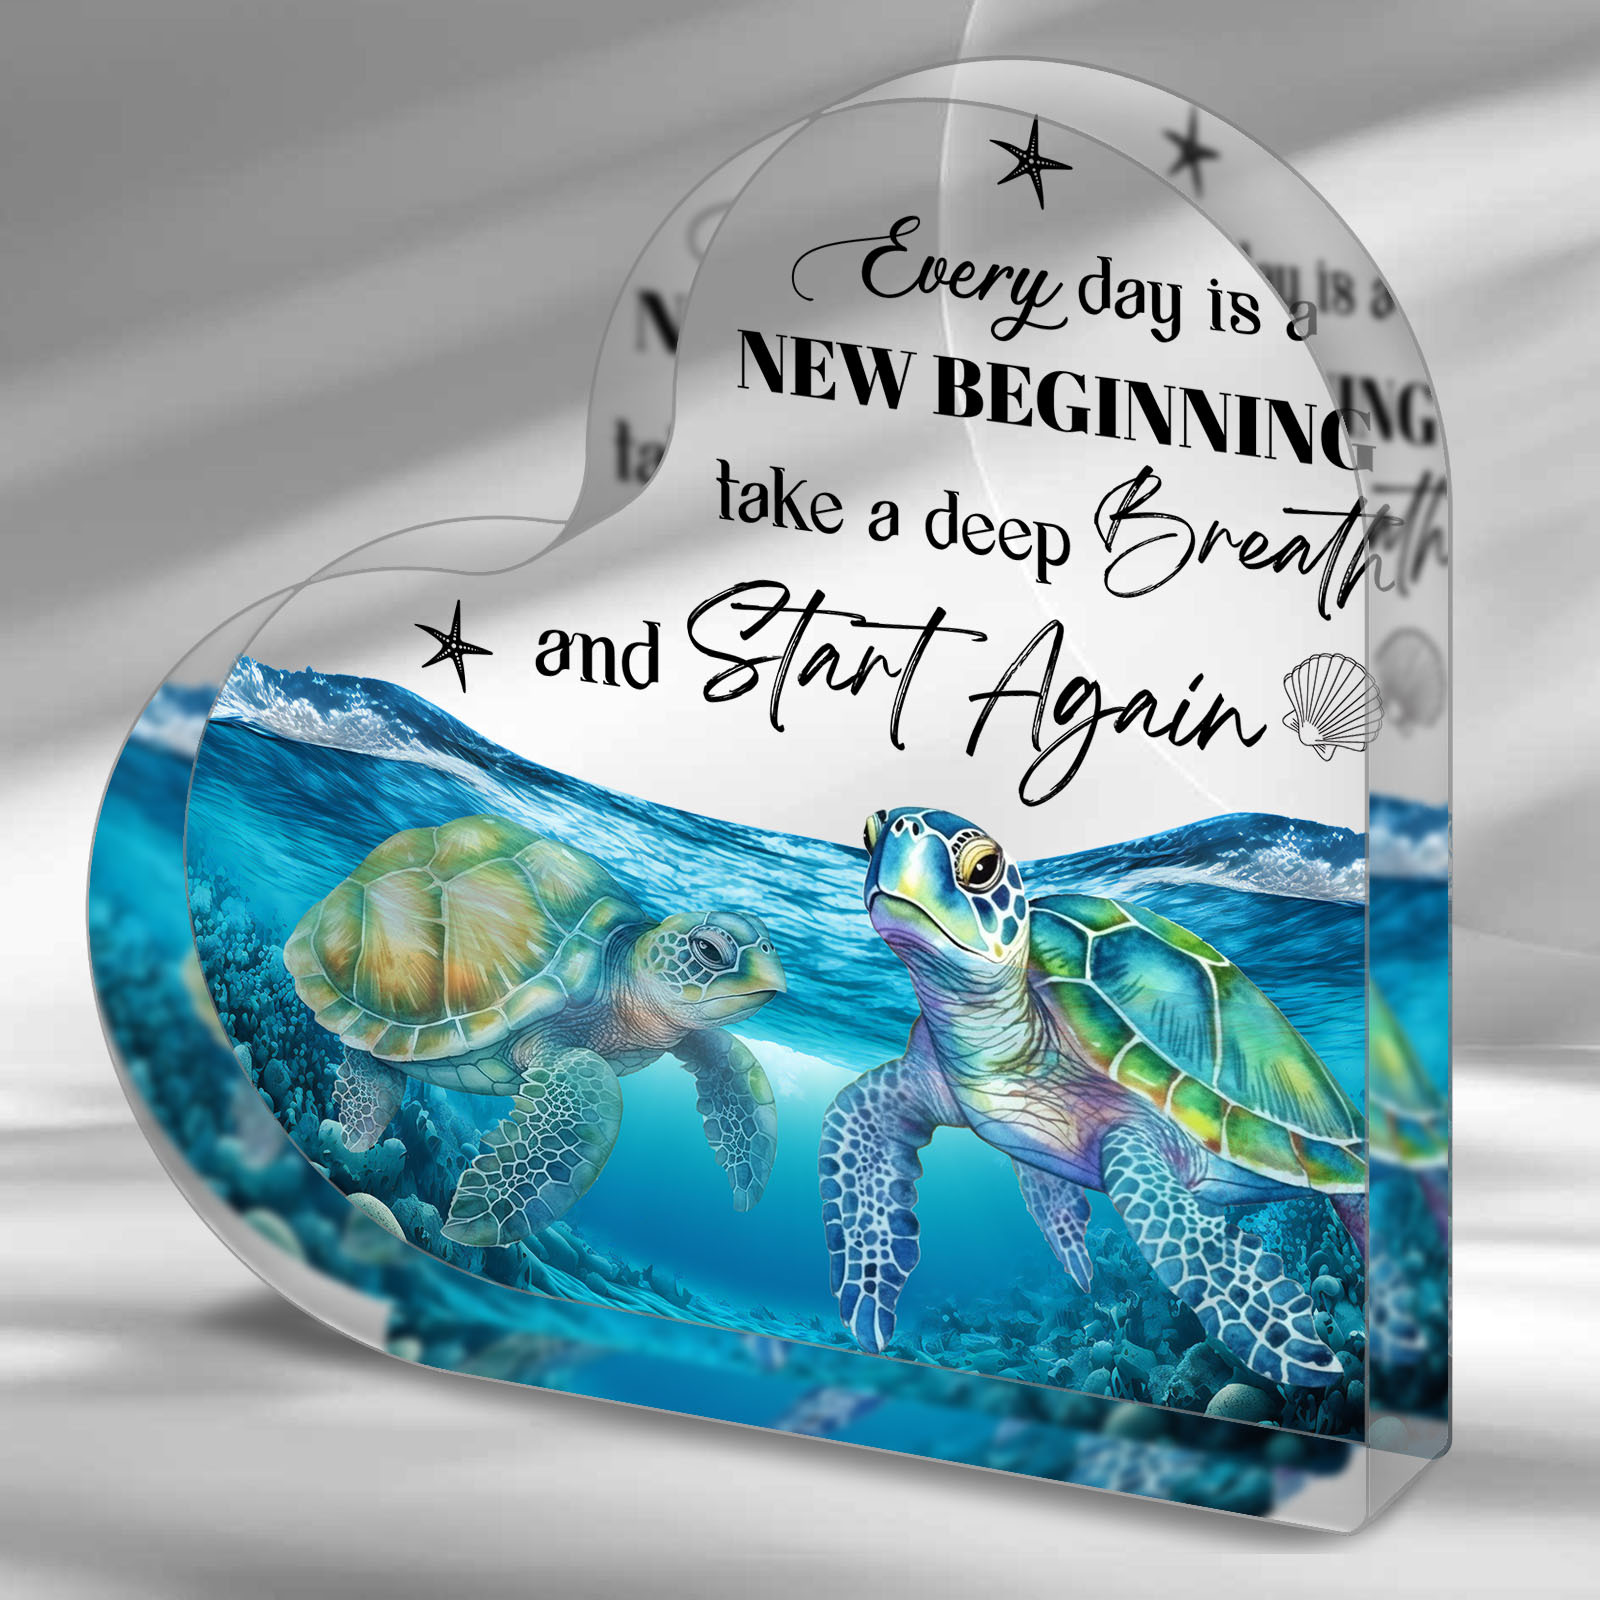 

1pc, Blue Sea Creatures Acrylic Desktop Decoration - Perfect Birthday Or Exchange Gift For Bedroom, Kitchen, Living Room, Or Office Decor - Unique Sea Turtle Design